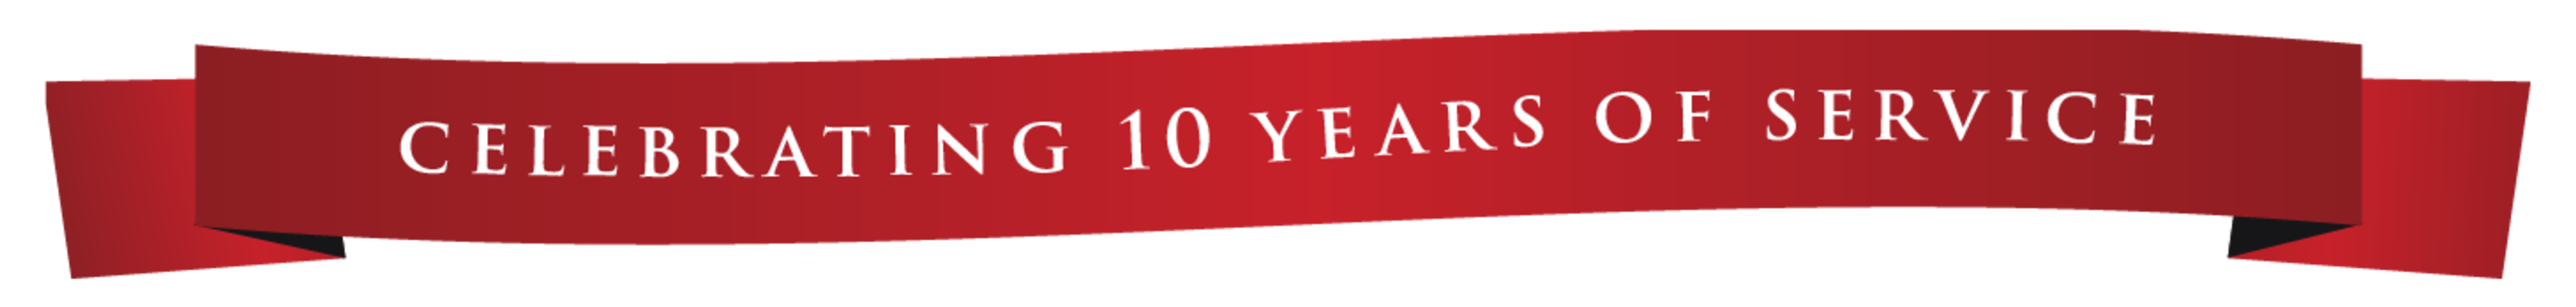 10 Years of Service Banner